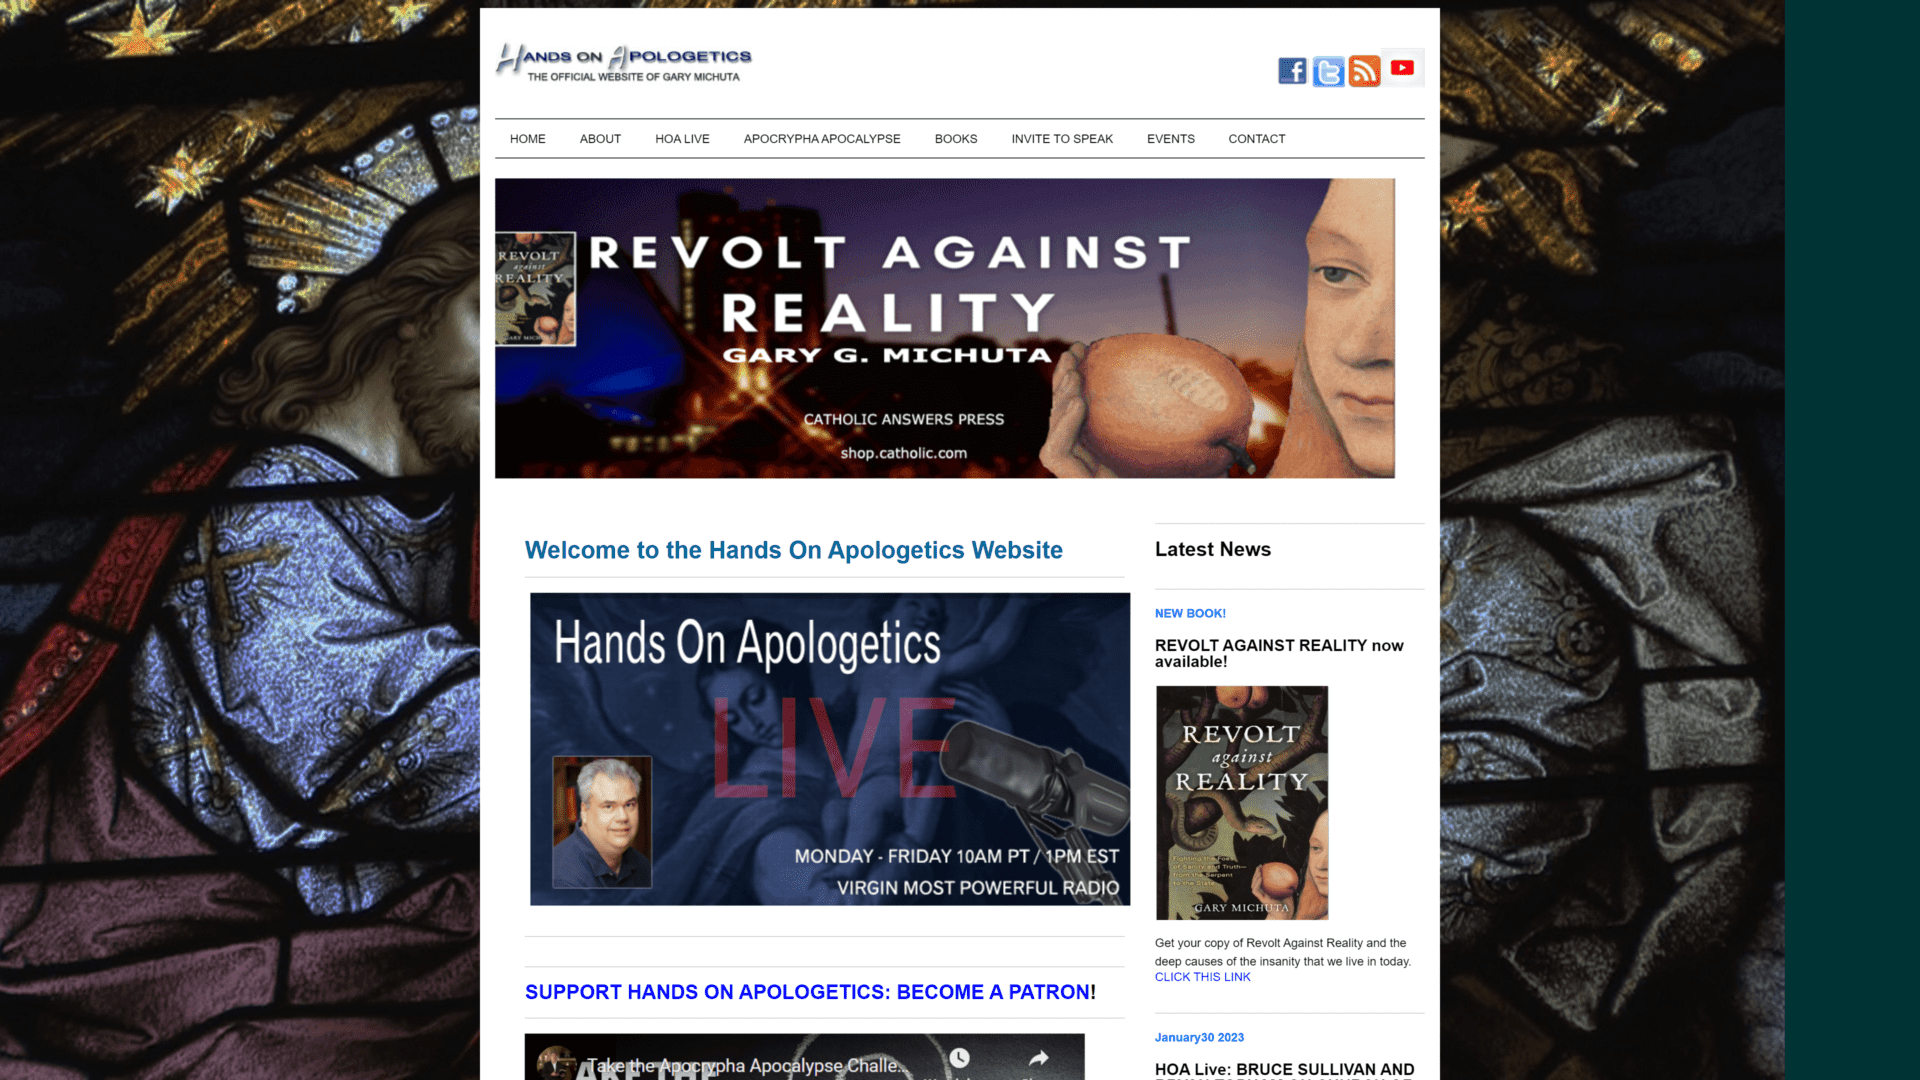 A screenshot of the hand-on apologetics homepage